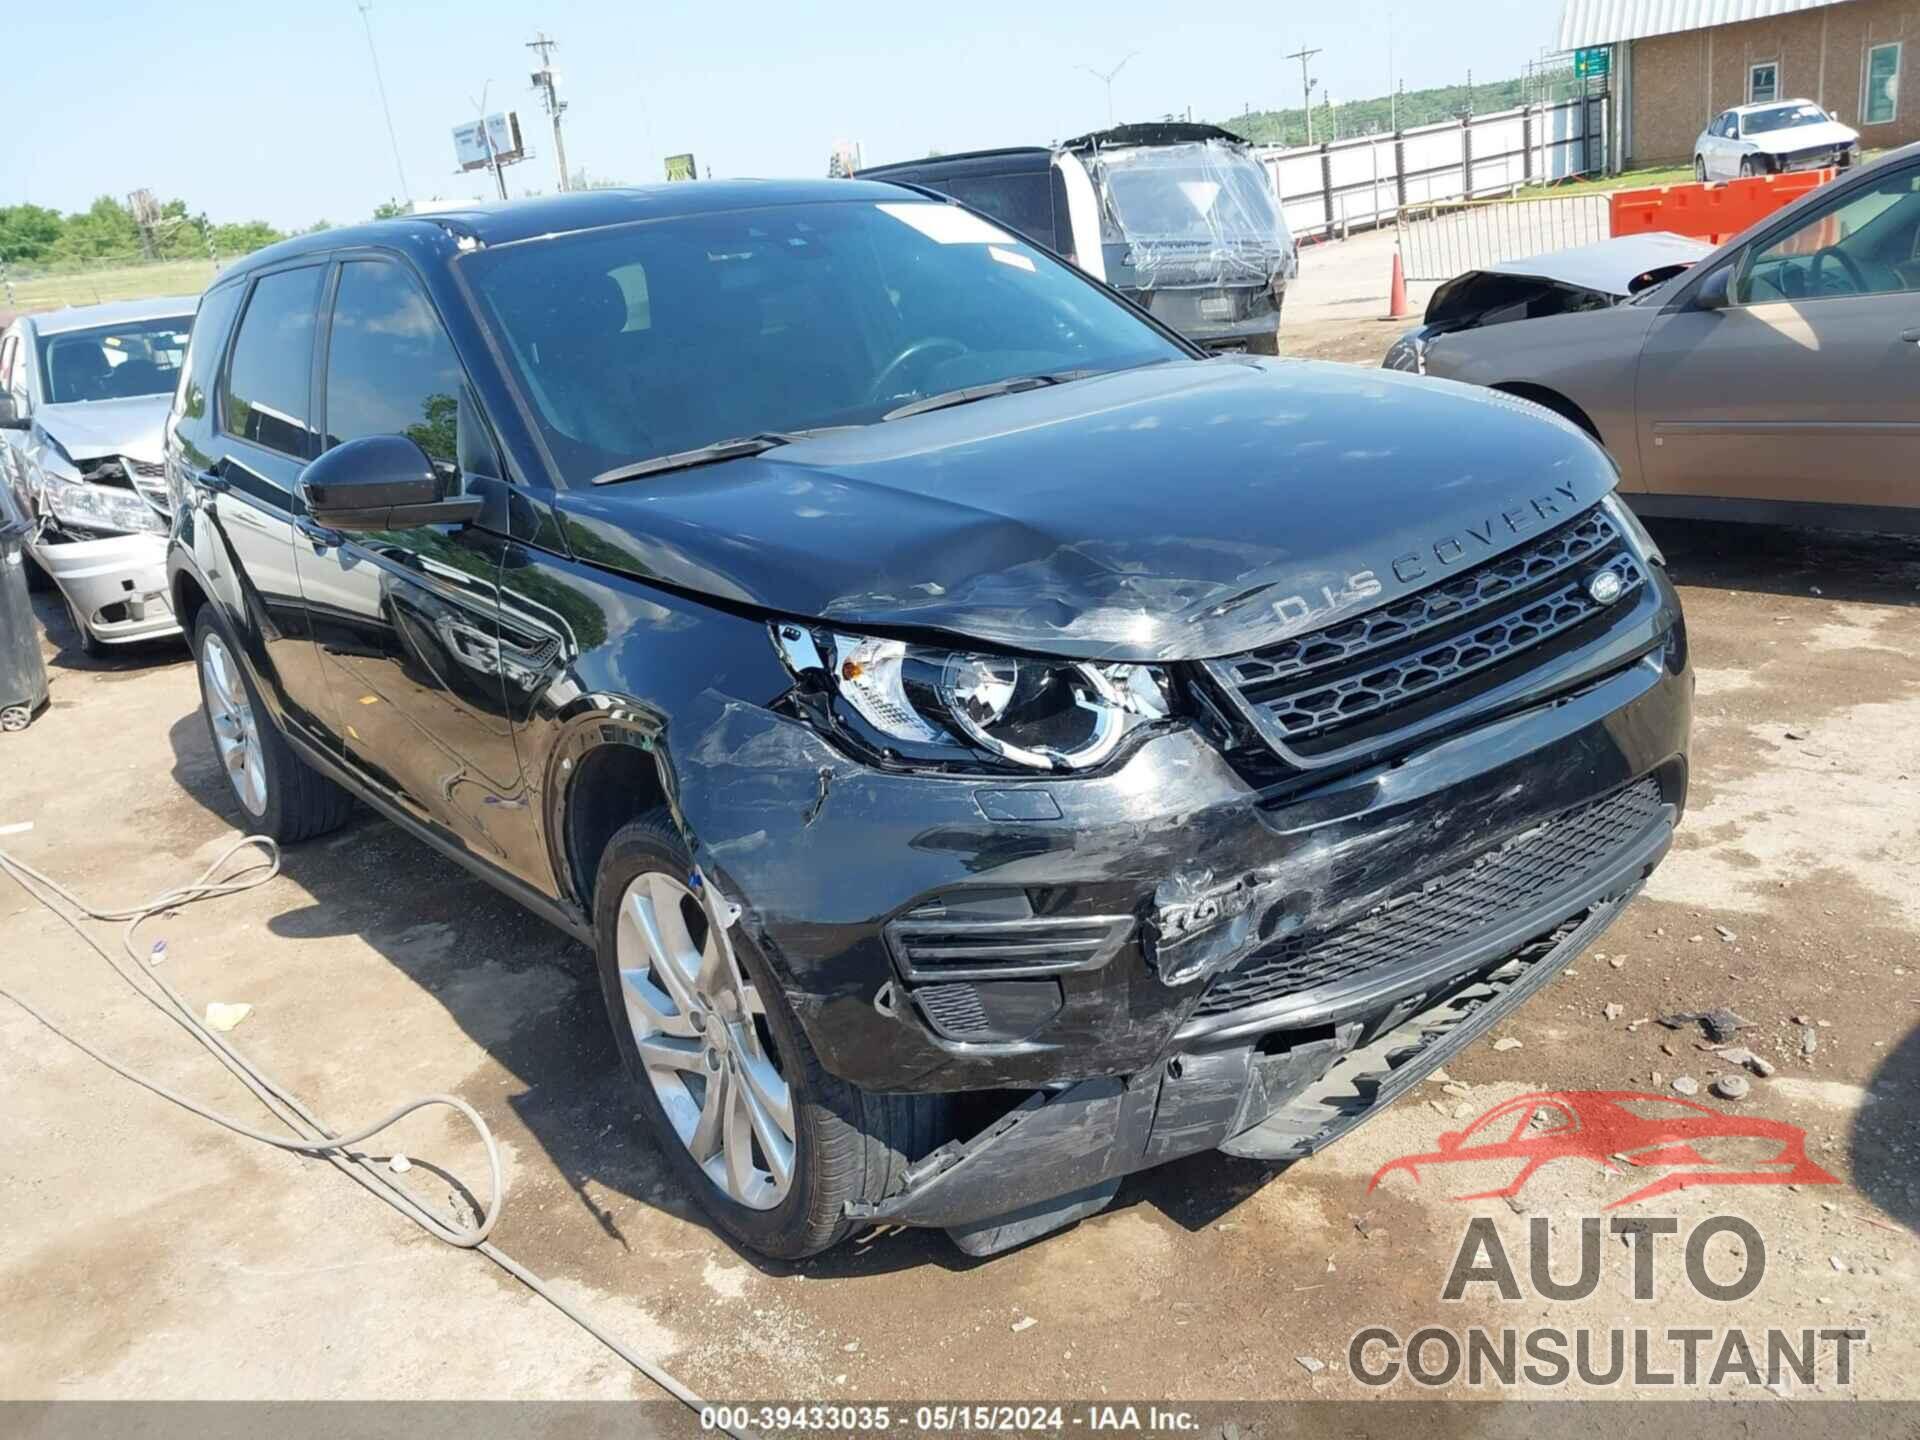 LAND ROVER DISCOVERY SPORT 2016 - SALCP2BG2GH605365